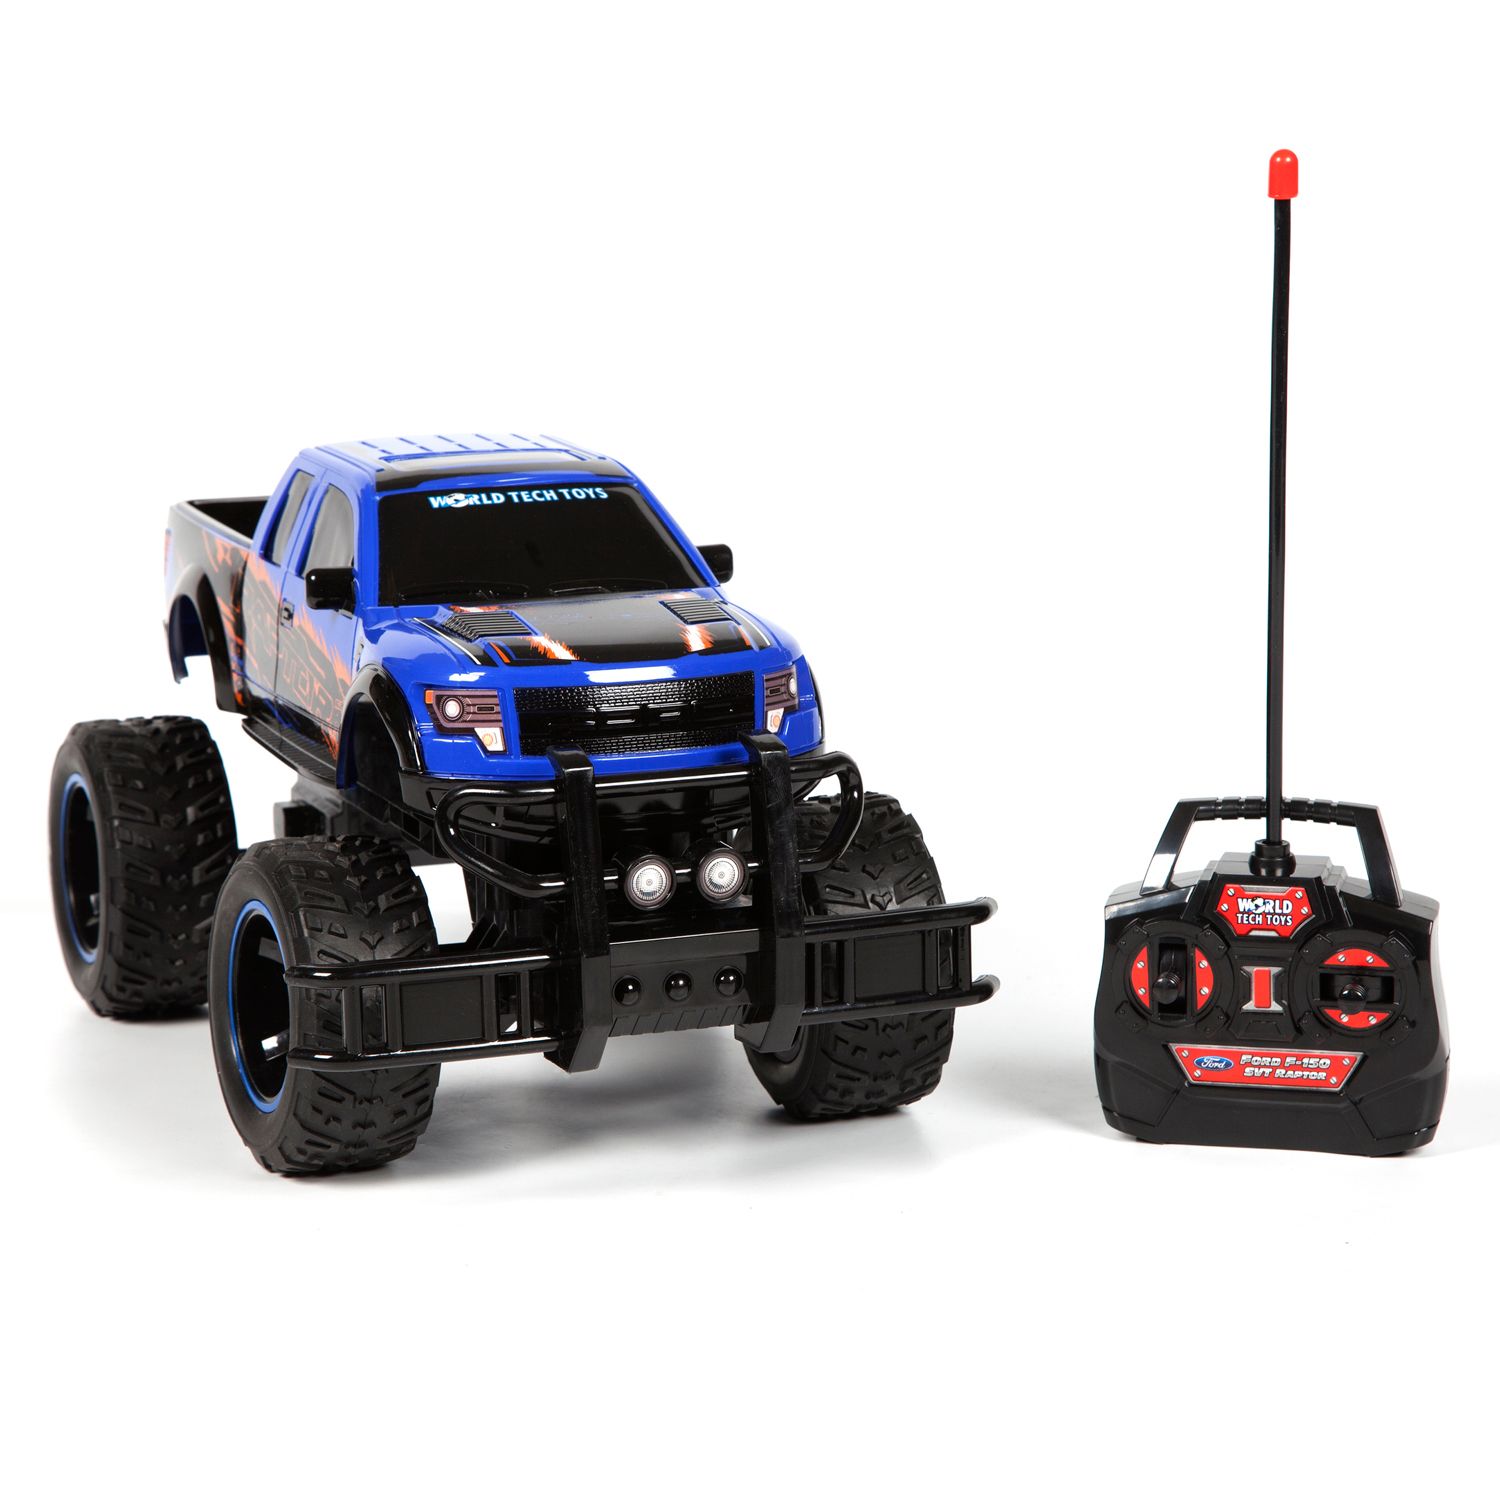 rc monster truck toy